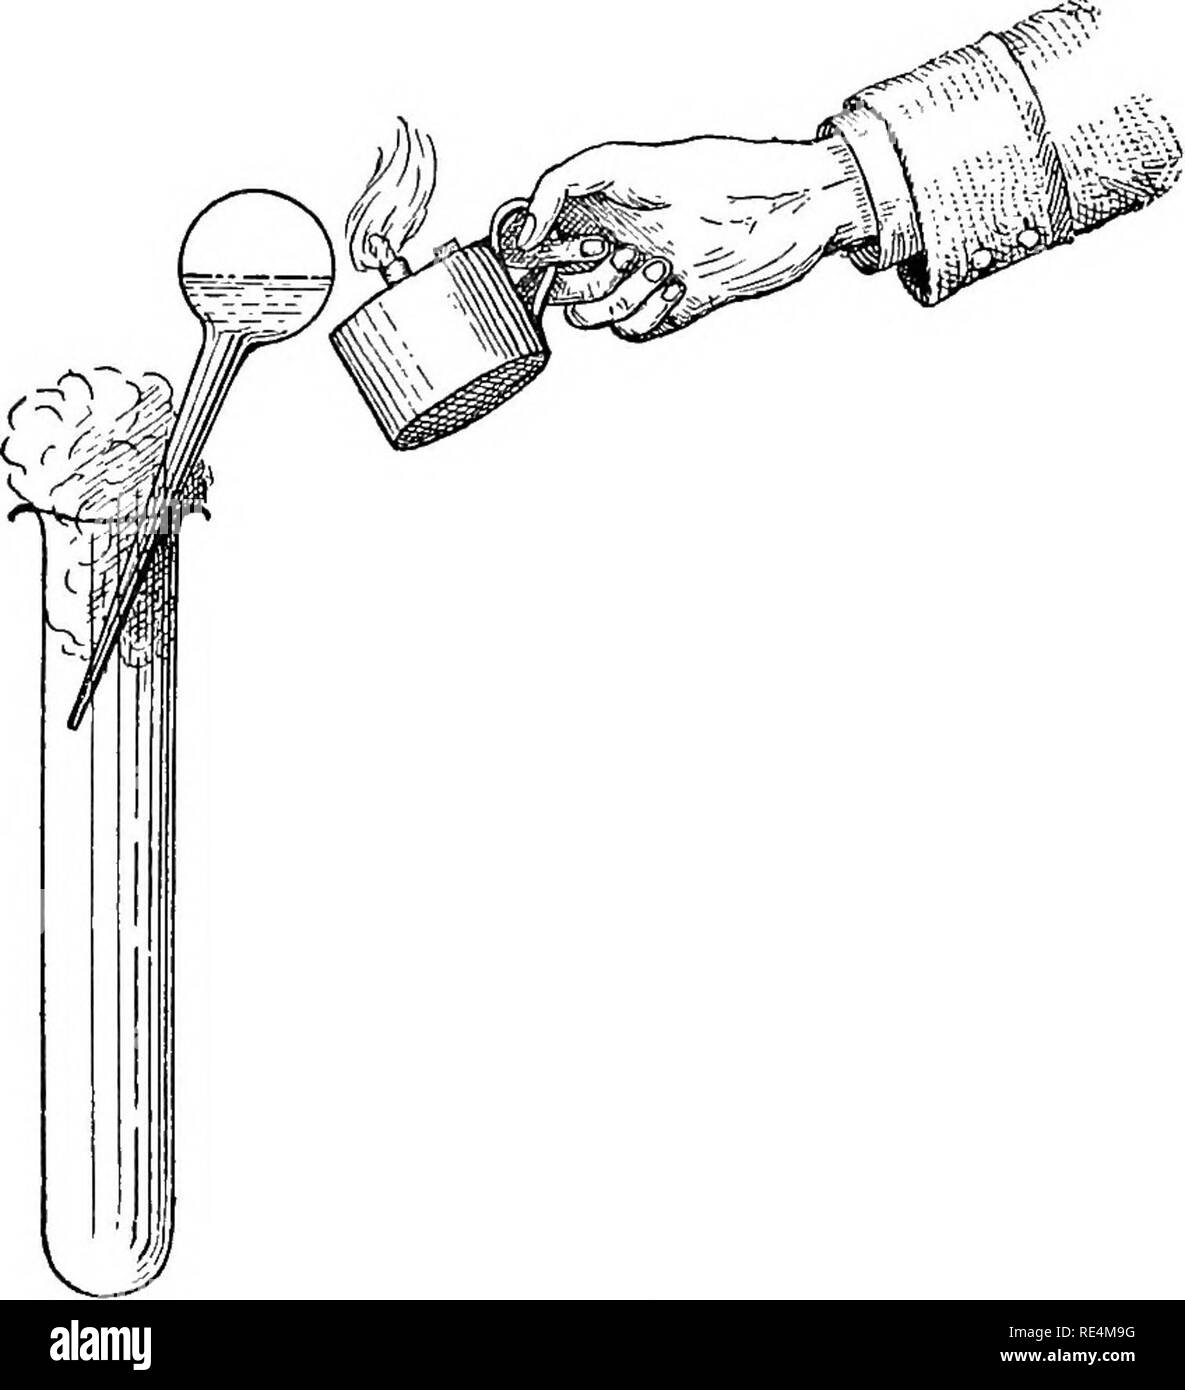 . A text-book of bacteriology. Bacteriology. 78 CULTURES IN SOLID MEDIA. neck of the little flask along the side of the cotton filter (see Fig. 46) and applying gentle heat to the bulb. The slender neck is first ste- rilized by passing it through a flame, and the point is broken off with sterile forceps. After inoculating the liquefied medium in the test tubes in the usual manner we may make plates or roll tubes. Cultures on Cooked Potato.—The method of preparing pota- toes for surface cultures has already been given (page 48). It was in using them that Koch first got his idea of the importanc Stock Photo